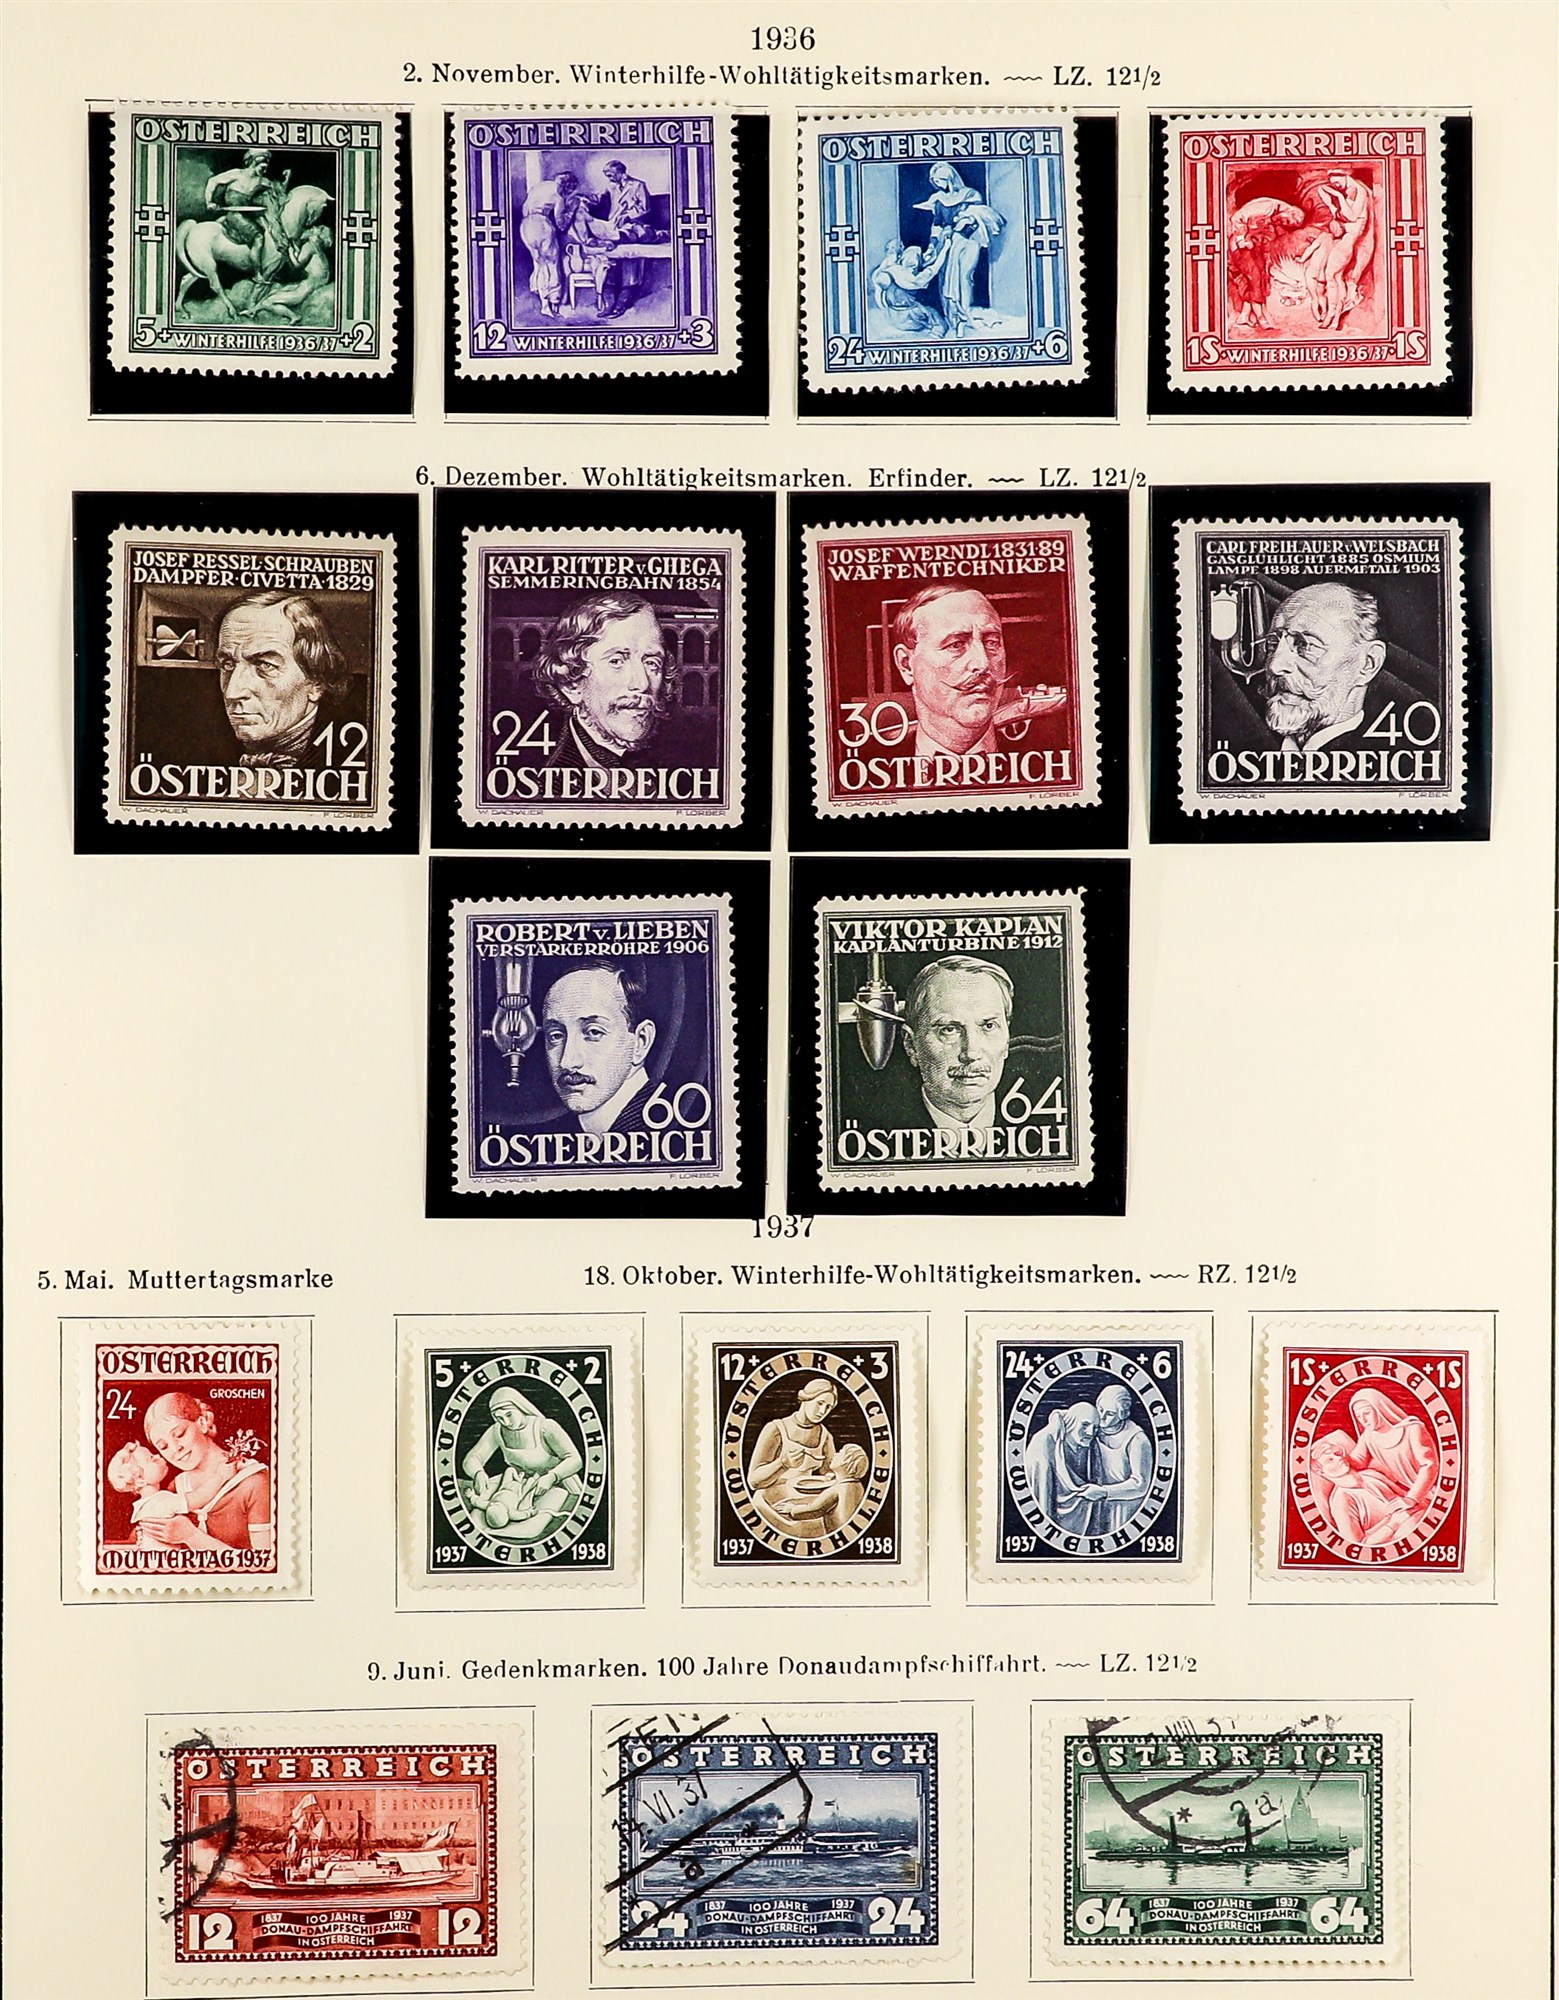 AUSTRIA 1918 - 1937 REPUBLIC COLLECTION of chiefly mint / never hinged mint sets in album incl - Image 21 of 22